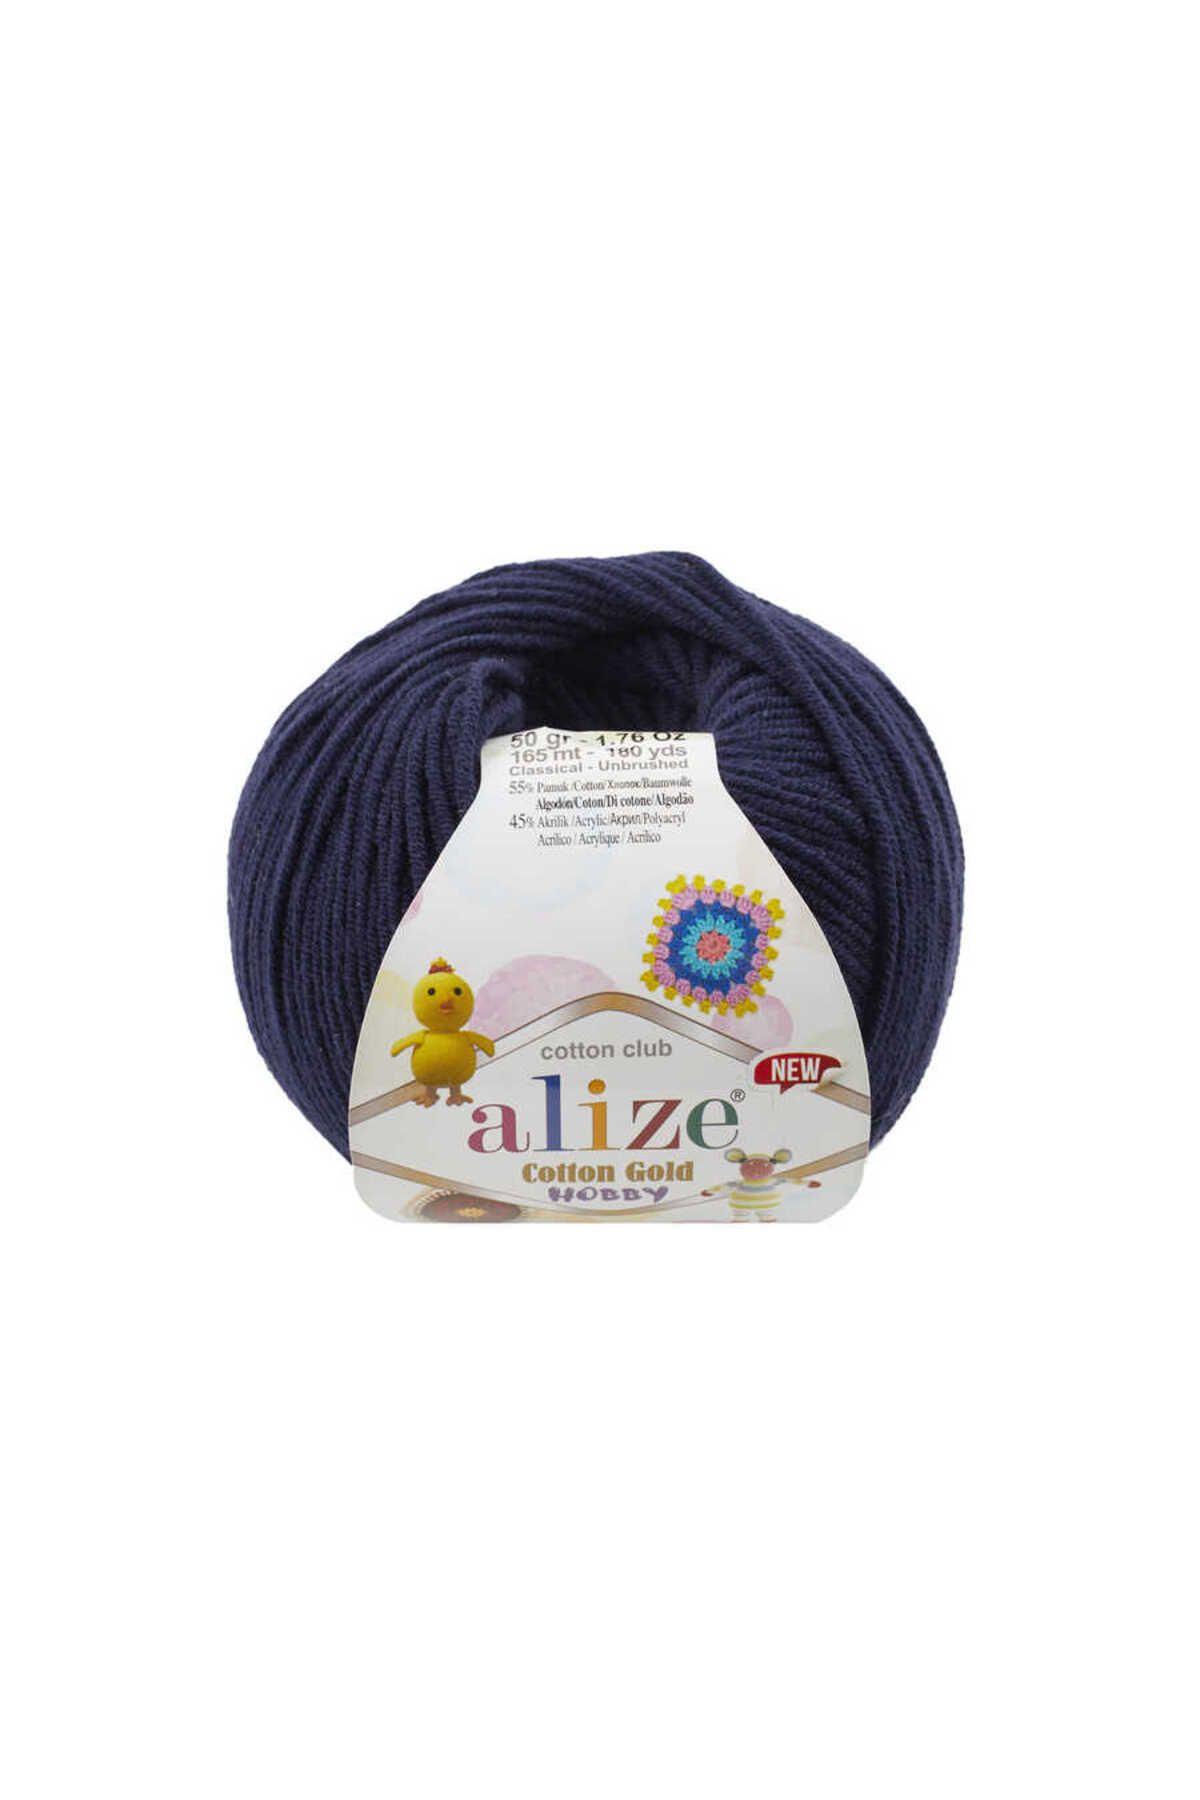 Alize Cotton Gold Hobby New 58